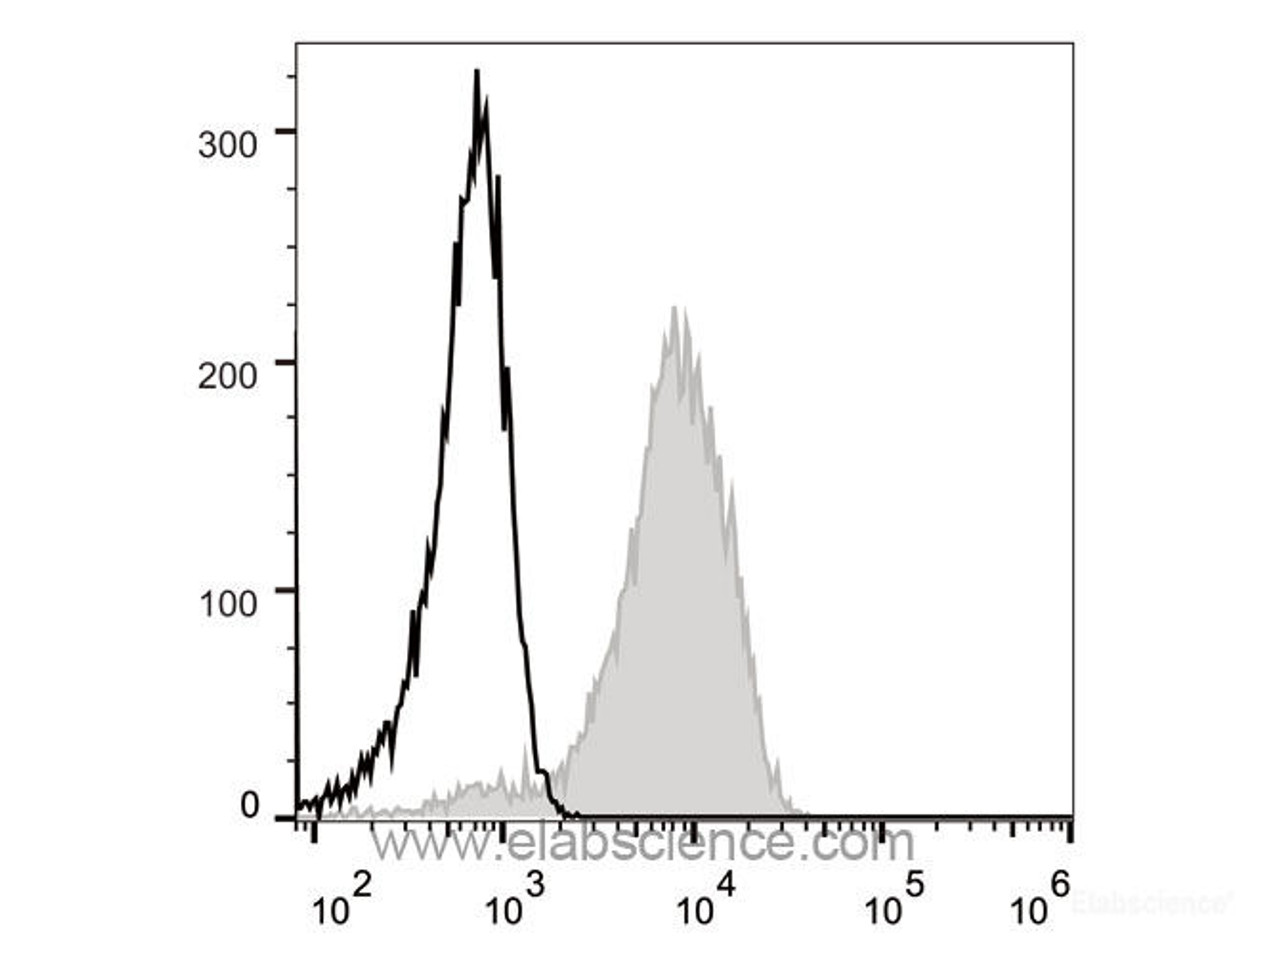 Human peripheral blood lymphocytes are stained with Anti-Human CD49d Monoclonal Antibody(FITC Conjugated)(filled gray histogram). Unstained lymphocytes (empty black histogram) are used as control.